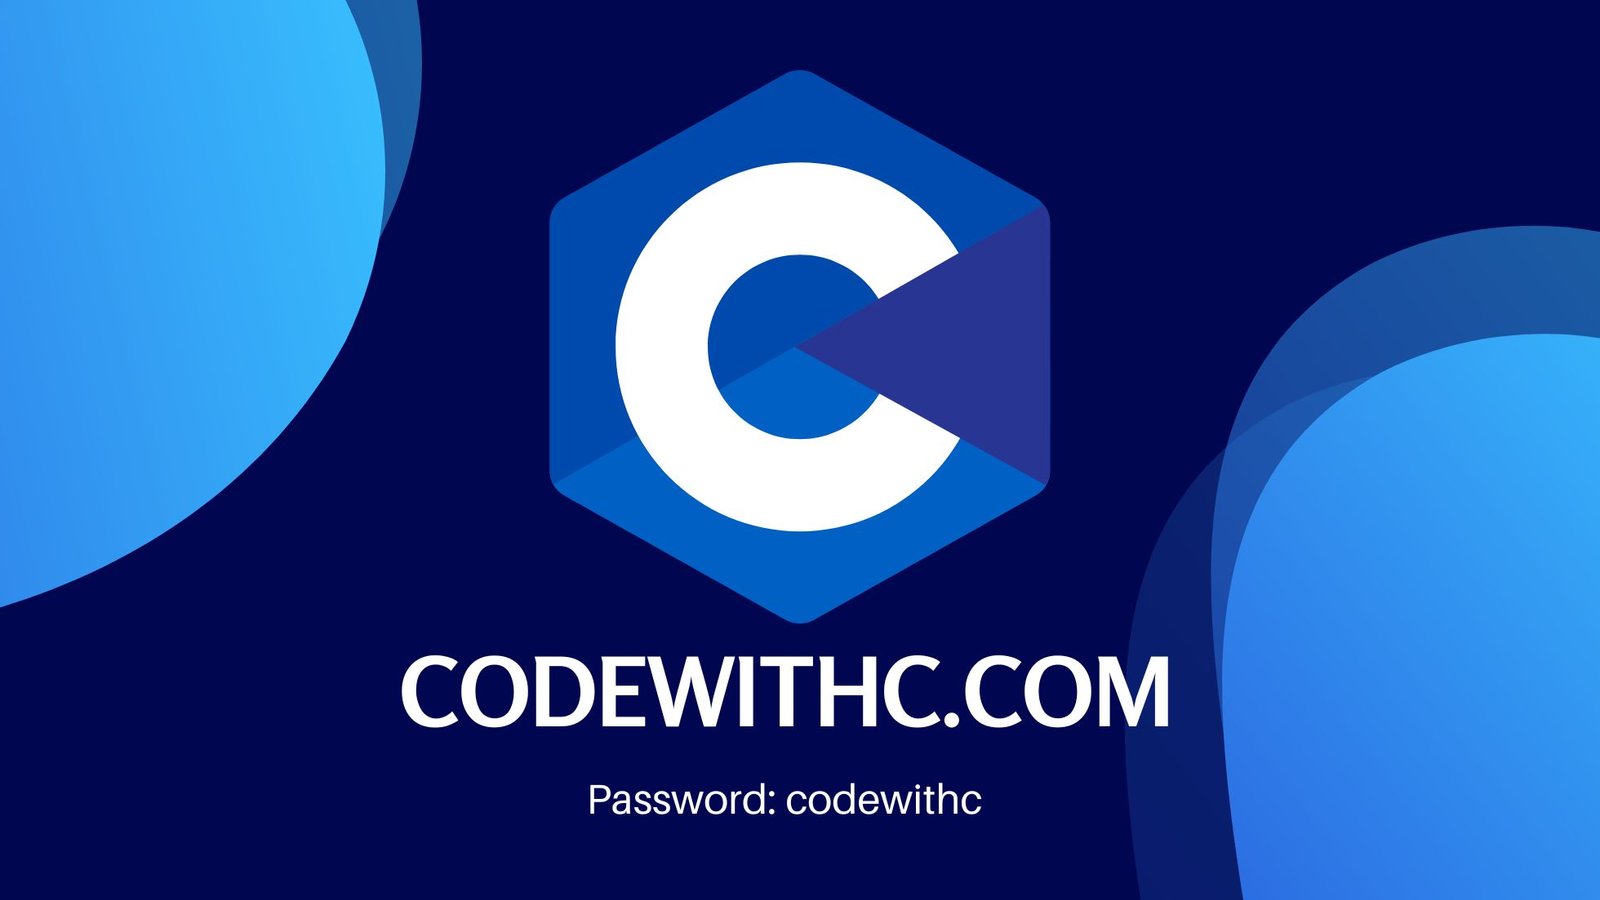 CODEWITHC